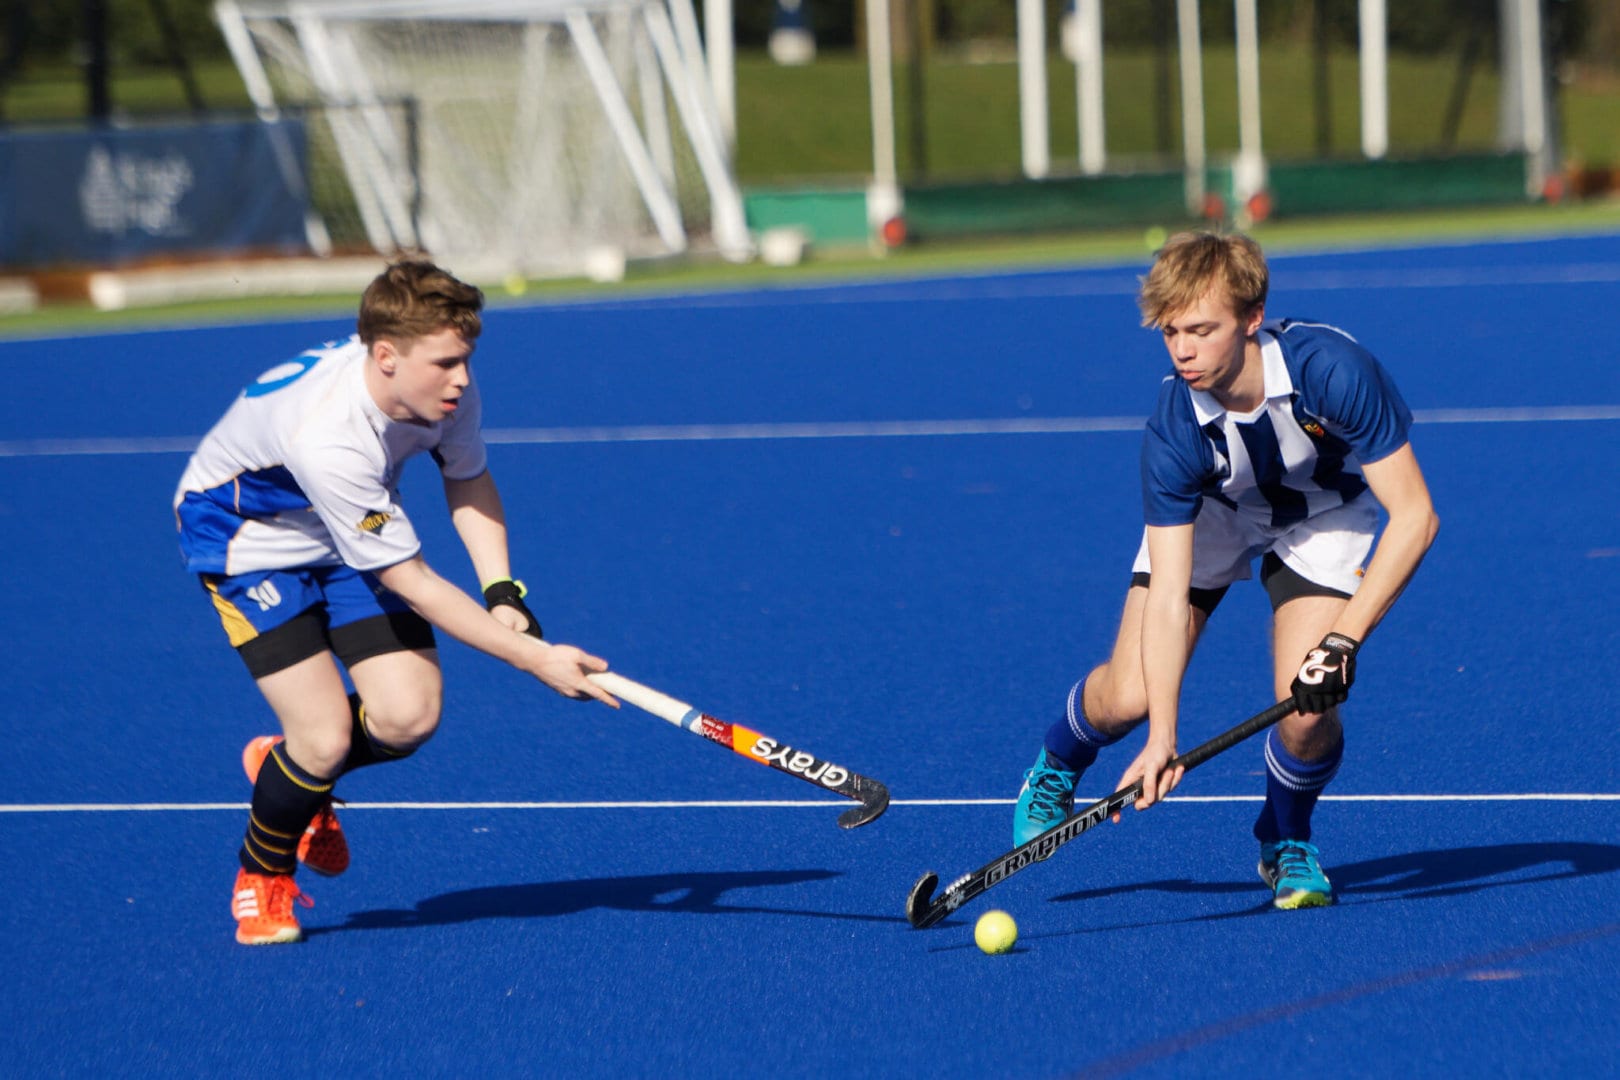 It is an exceptional turf for hockey fields and, being a versatile synthetic playing surface, is also an ideal turf for multi-sport facilities.